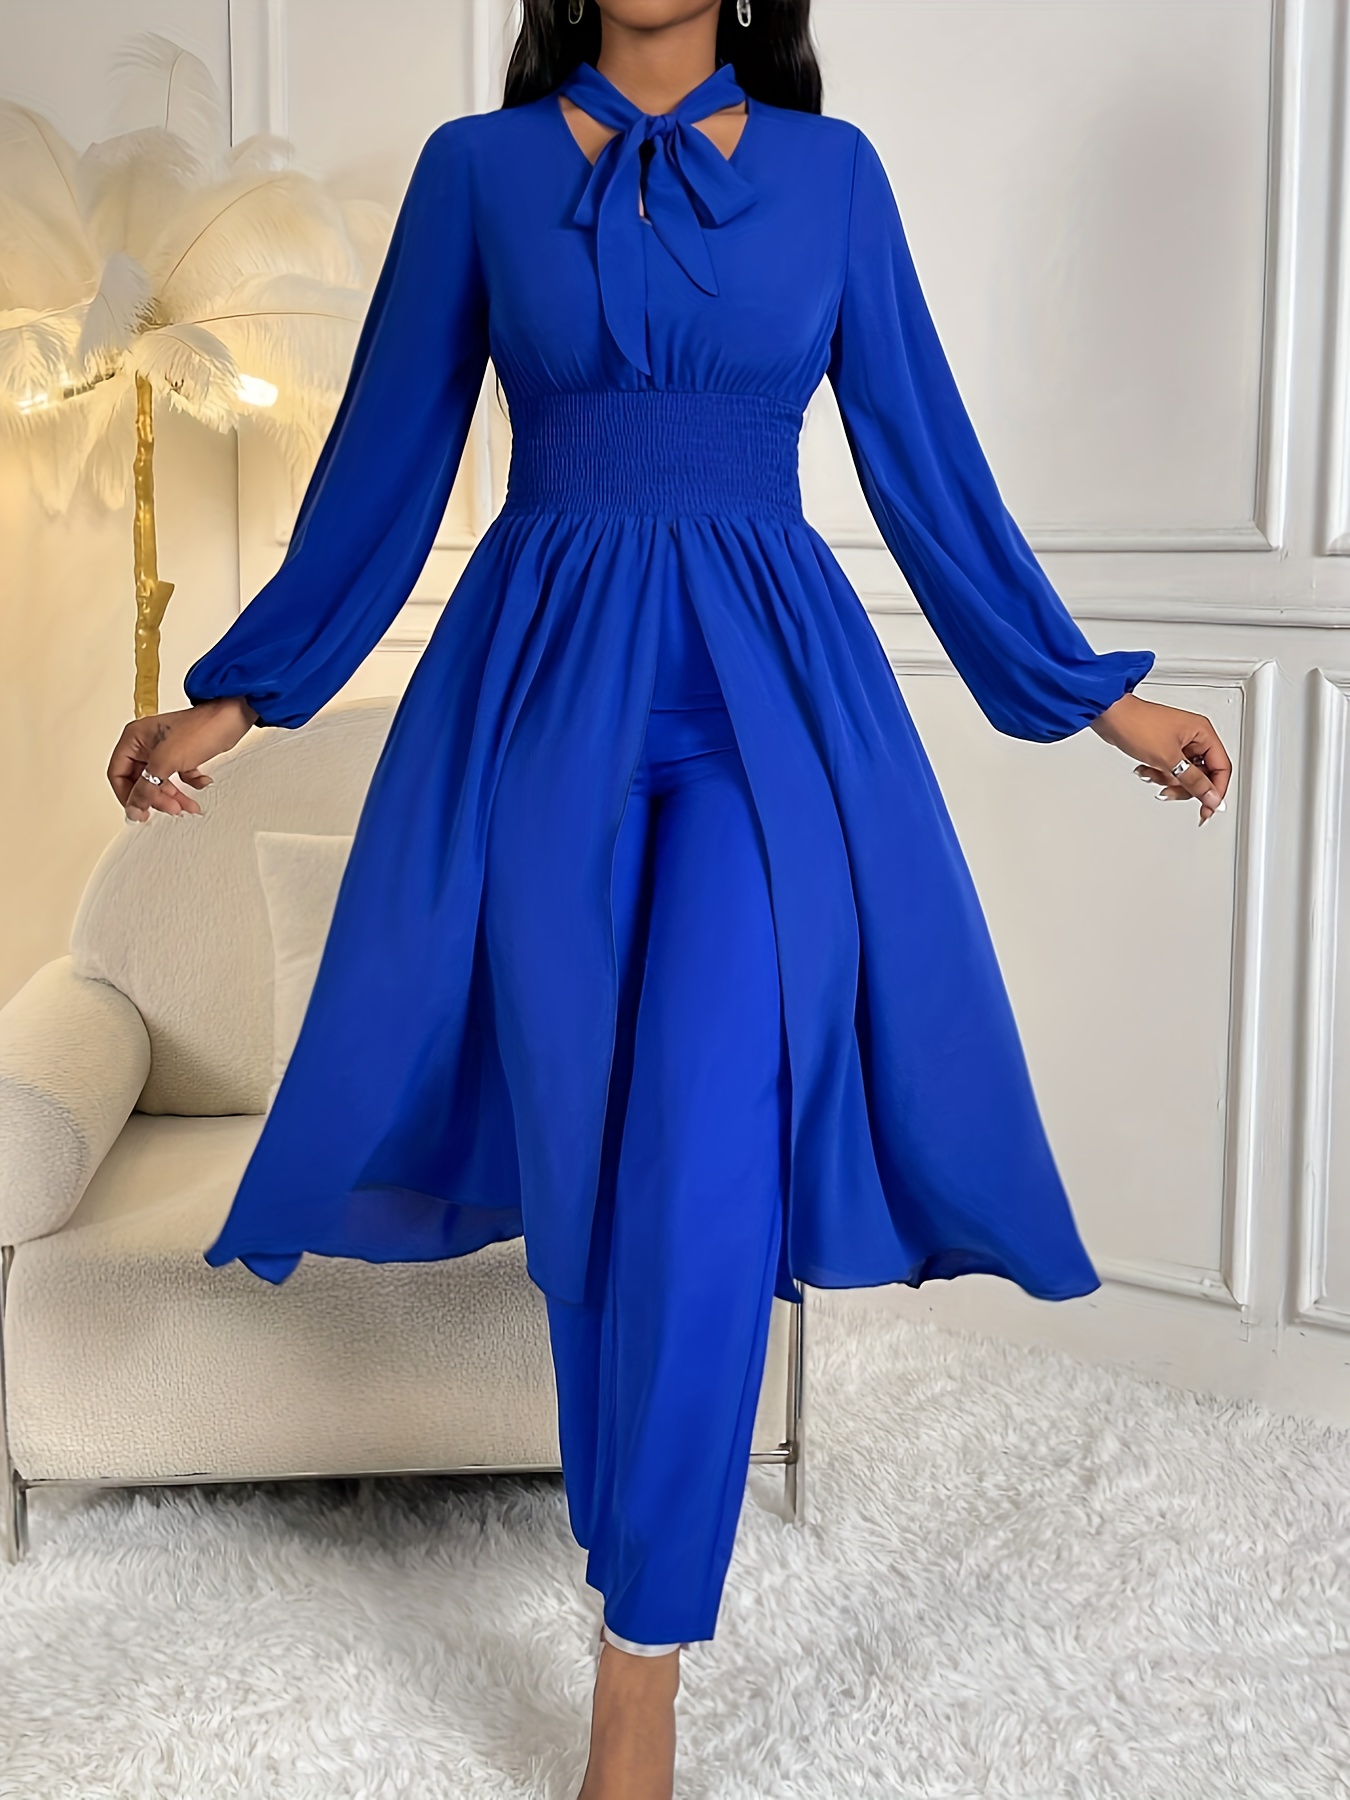 HSMQHJWE Empire Pants Pants Suits For Women Business Casual Pants